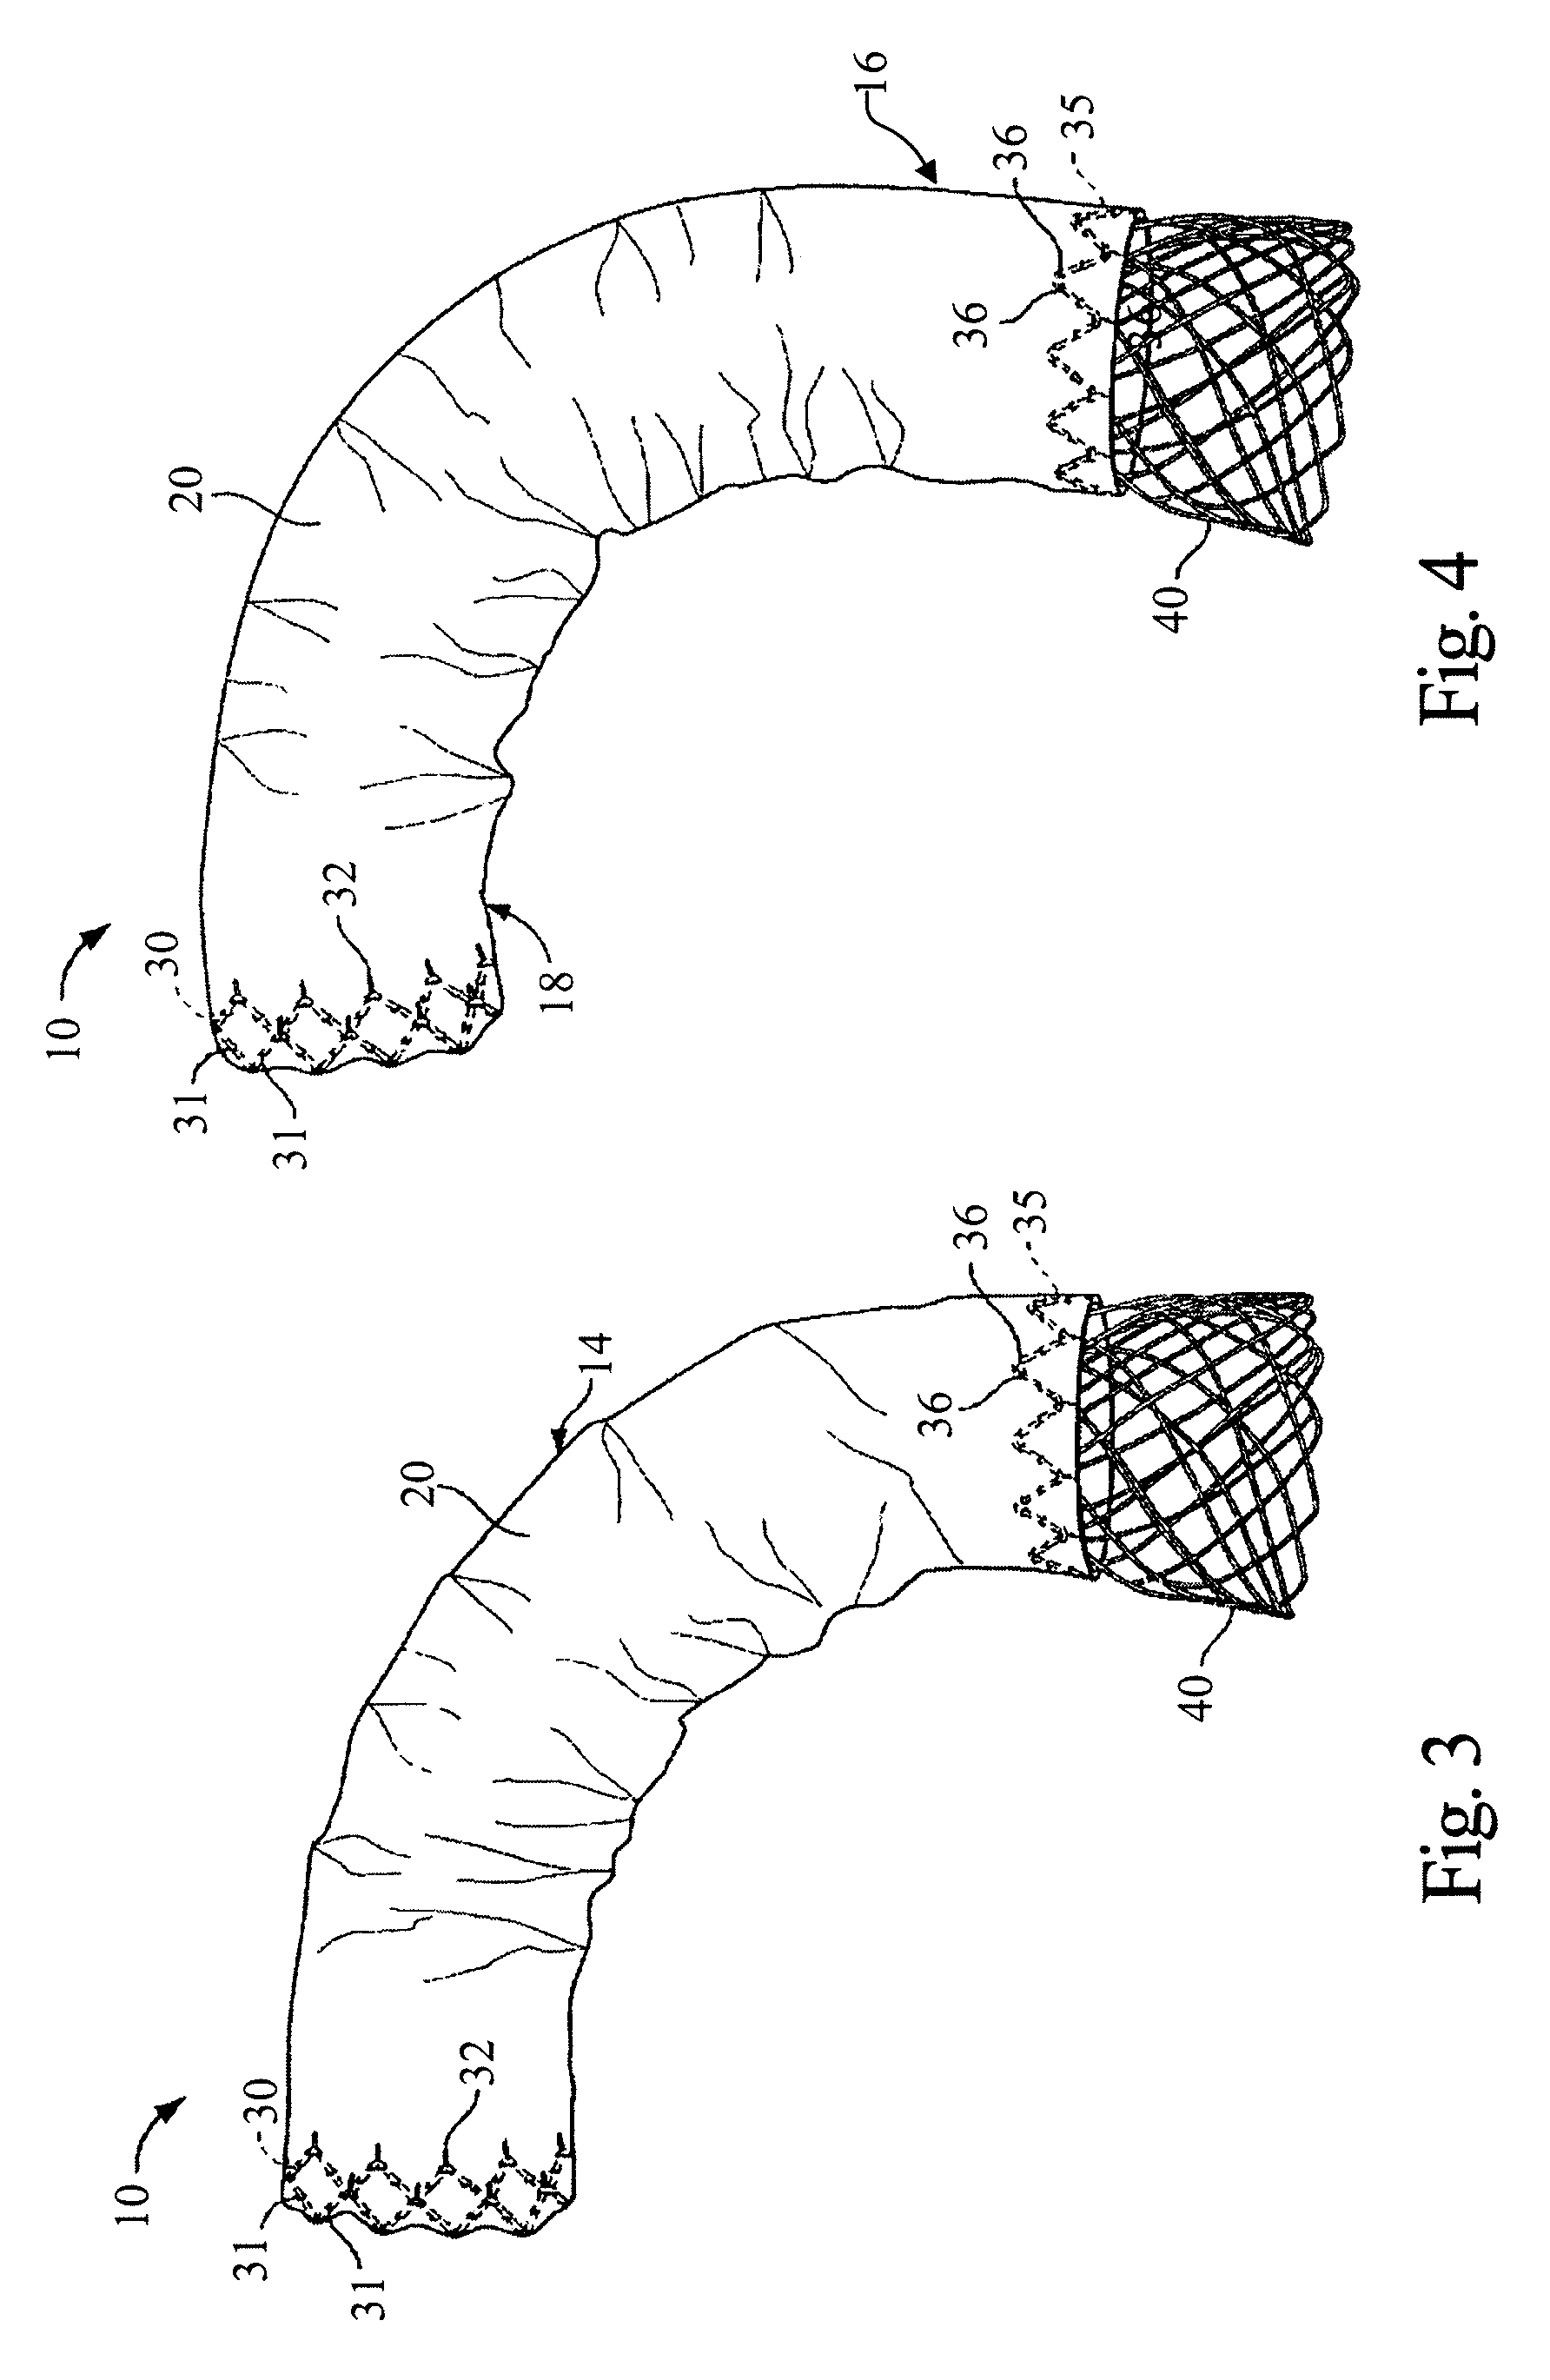 Stent Graft Delivery System for Accurate Deployment